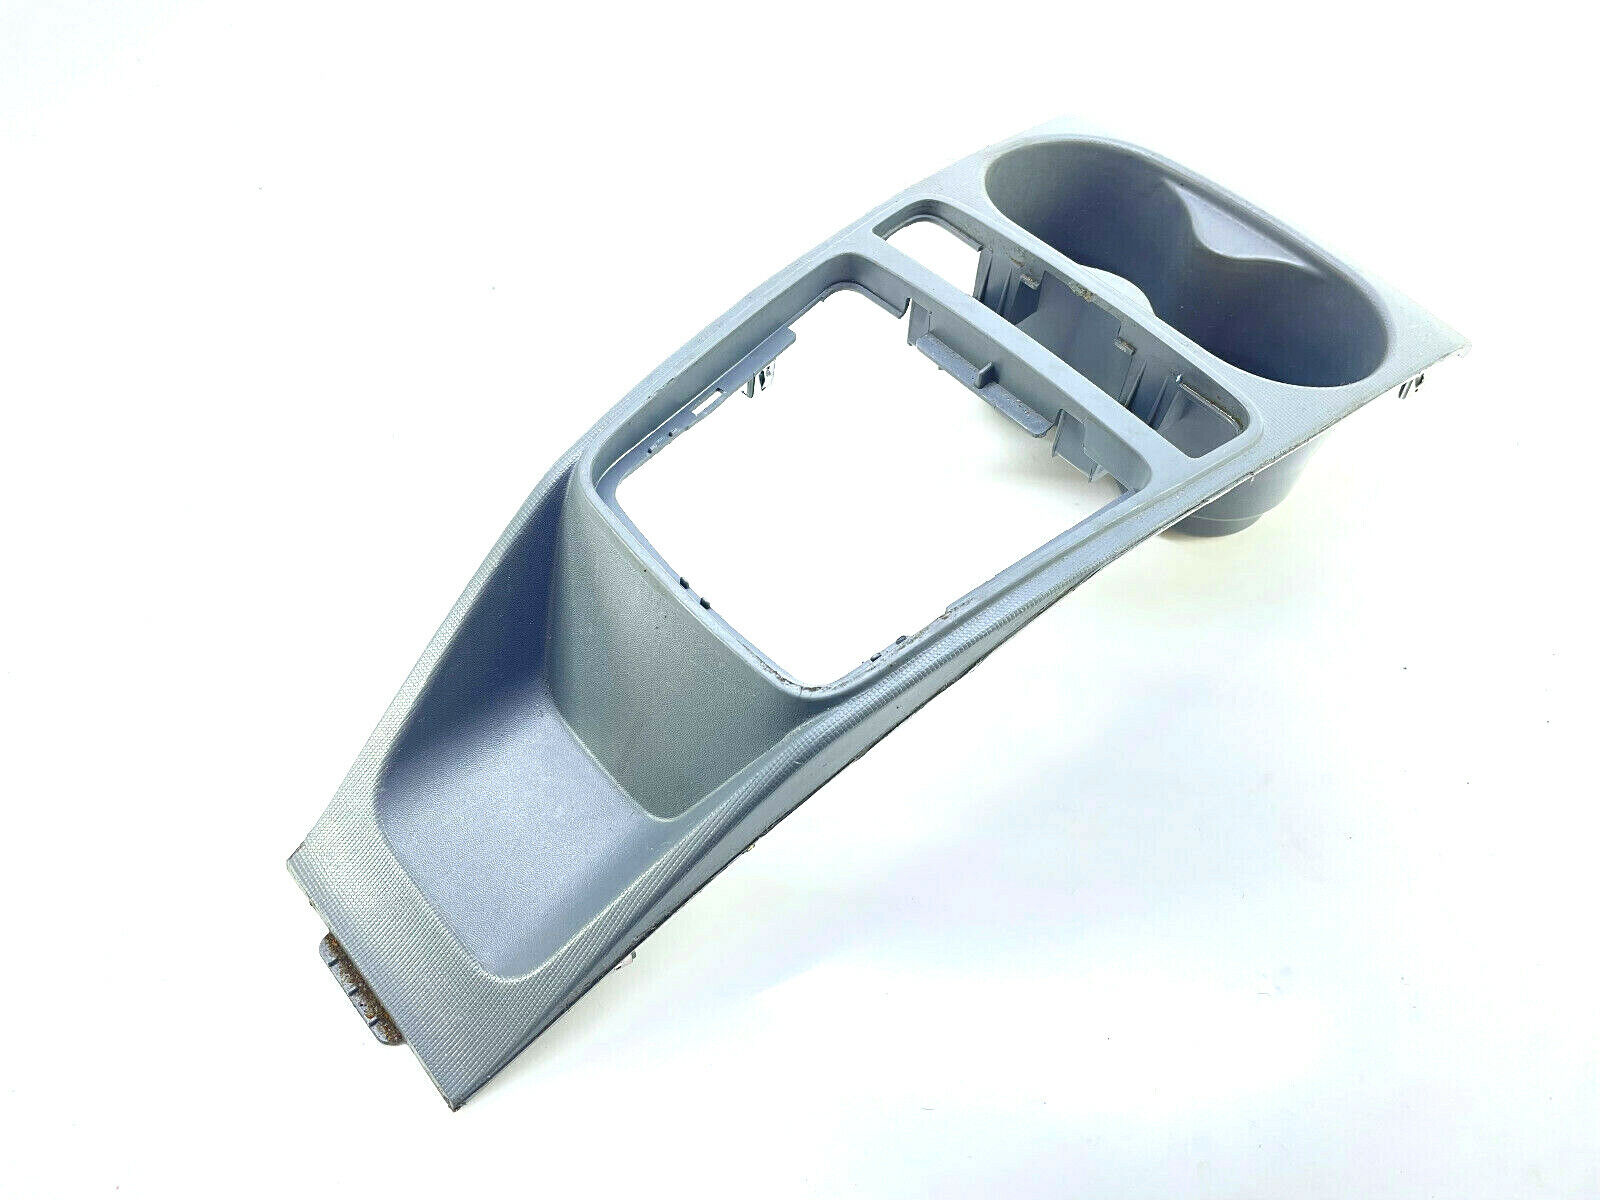 SEAT IBIZA 6J CENTRE CONSOLE CUP HOLDER IN GREY 6J0858331 2008-2016🌟